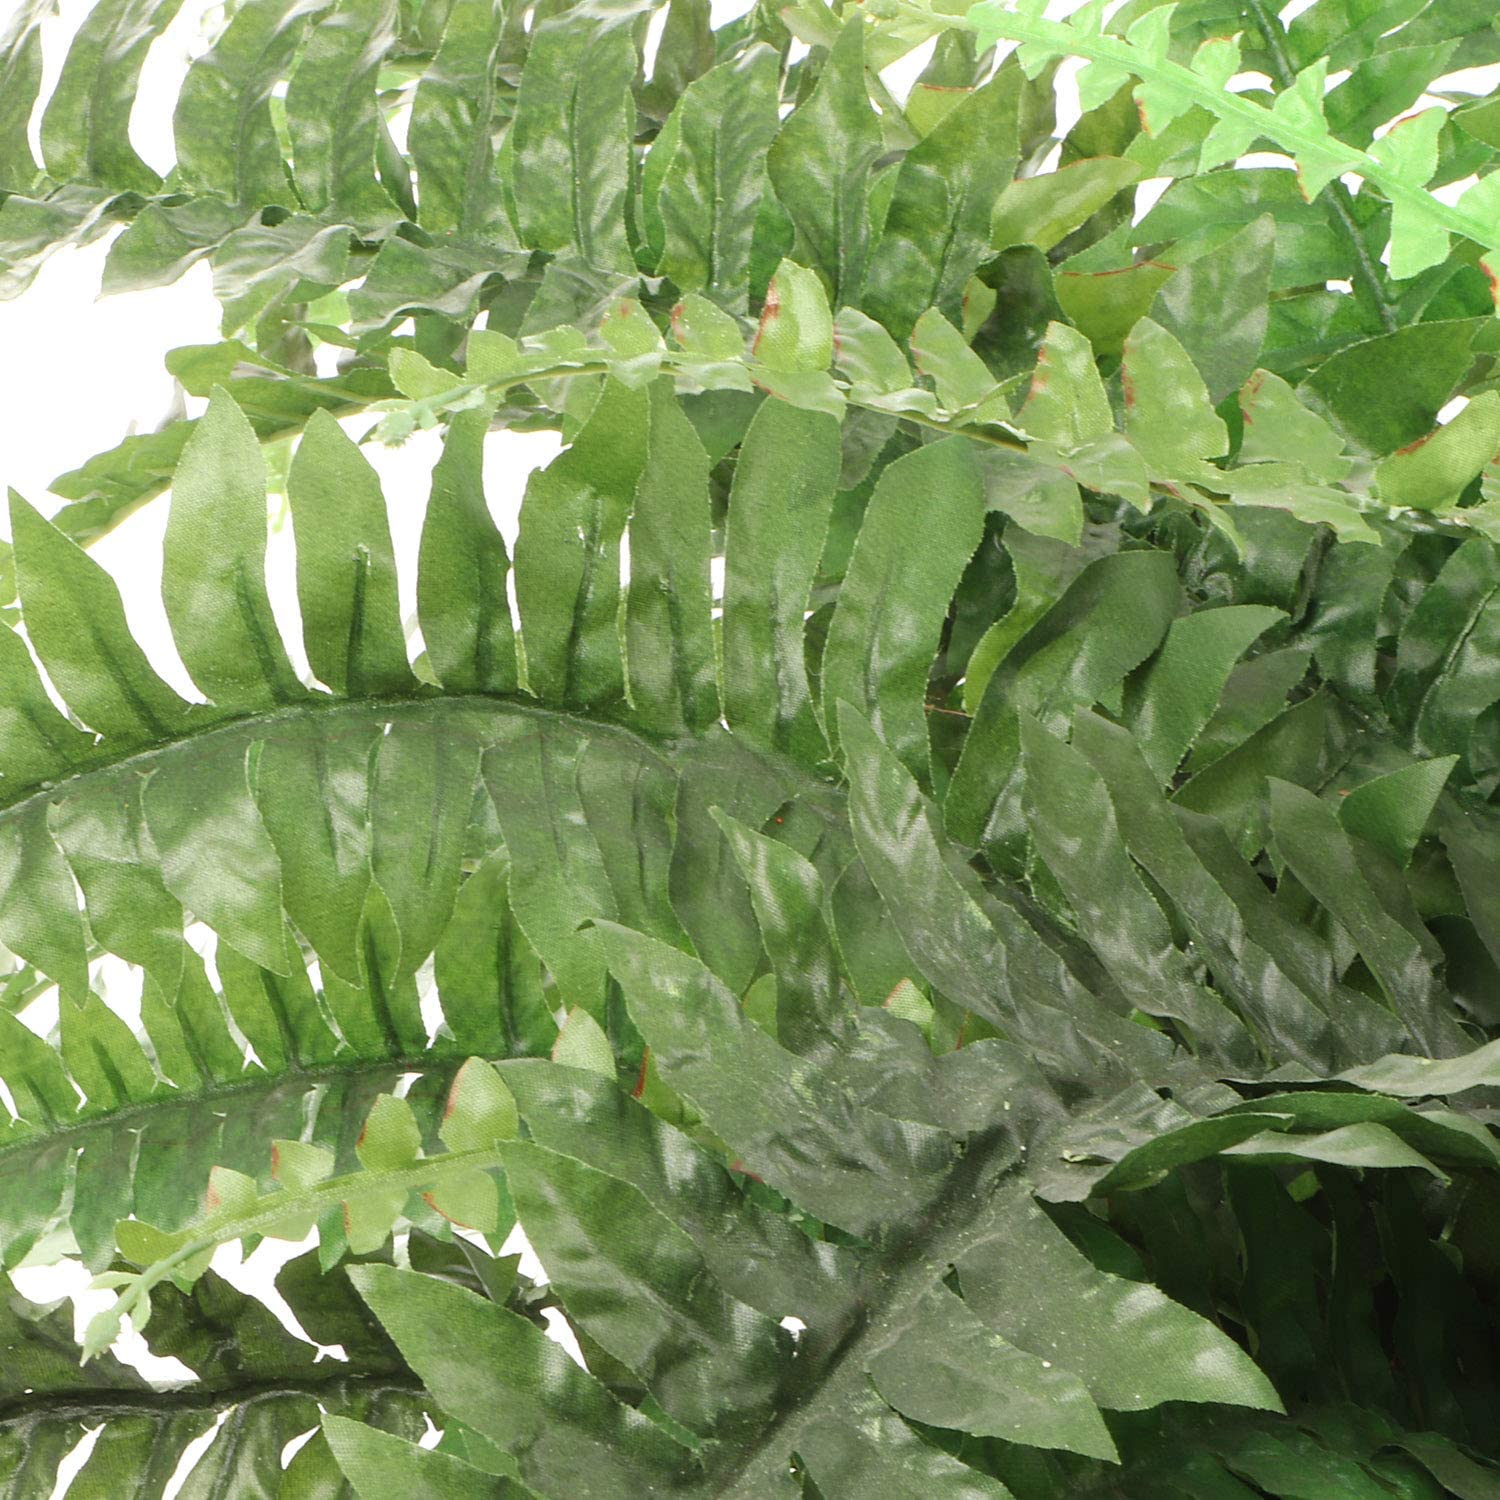 Boston Fern Artificial Plants - Outdoor or Indoor House Plant, Hanging Basket or Planter, 48” Inch Diameter 48 Fronds  ArtificialFlowers   